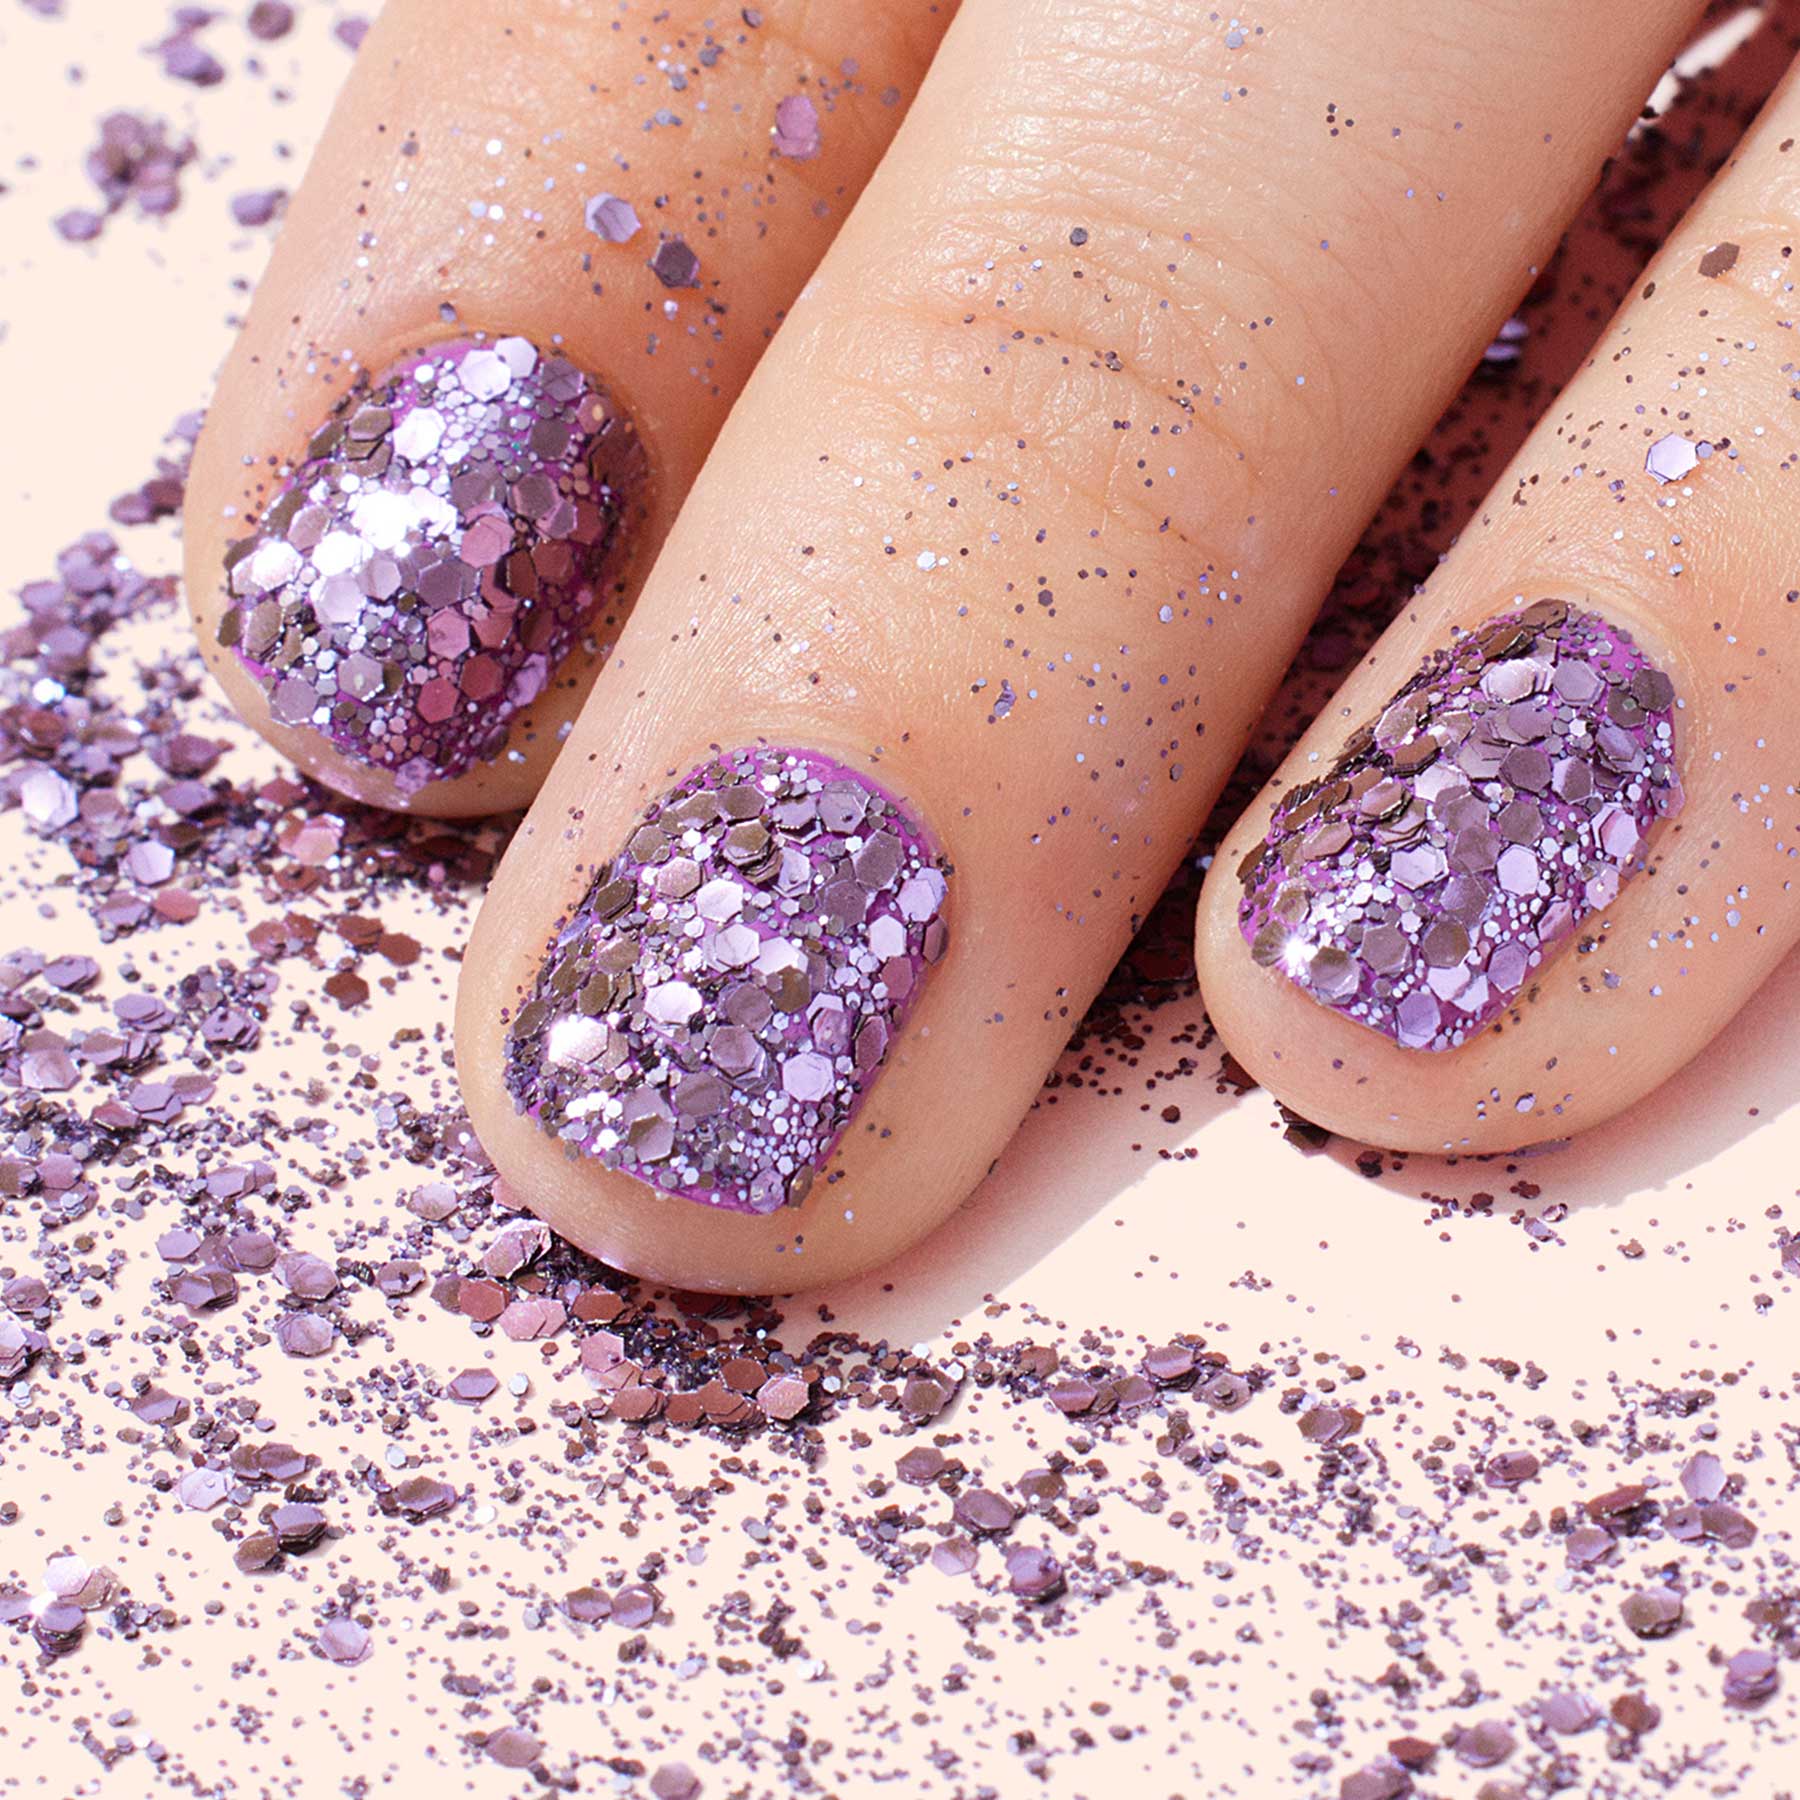 Amethyst Sky Biodegradable Glitter 1 Ounce - Made from Plant Cellulose,  Earth Friendly. Perfect for Body, Cosmetics, Crafts, DIY Projects. Can be